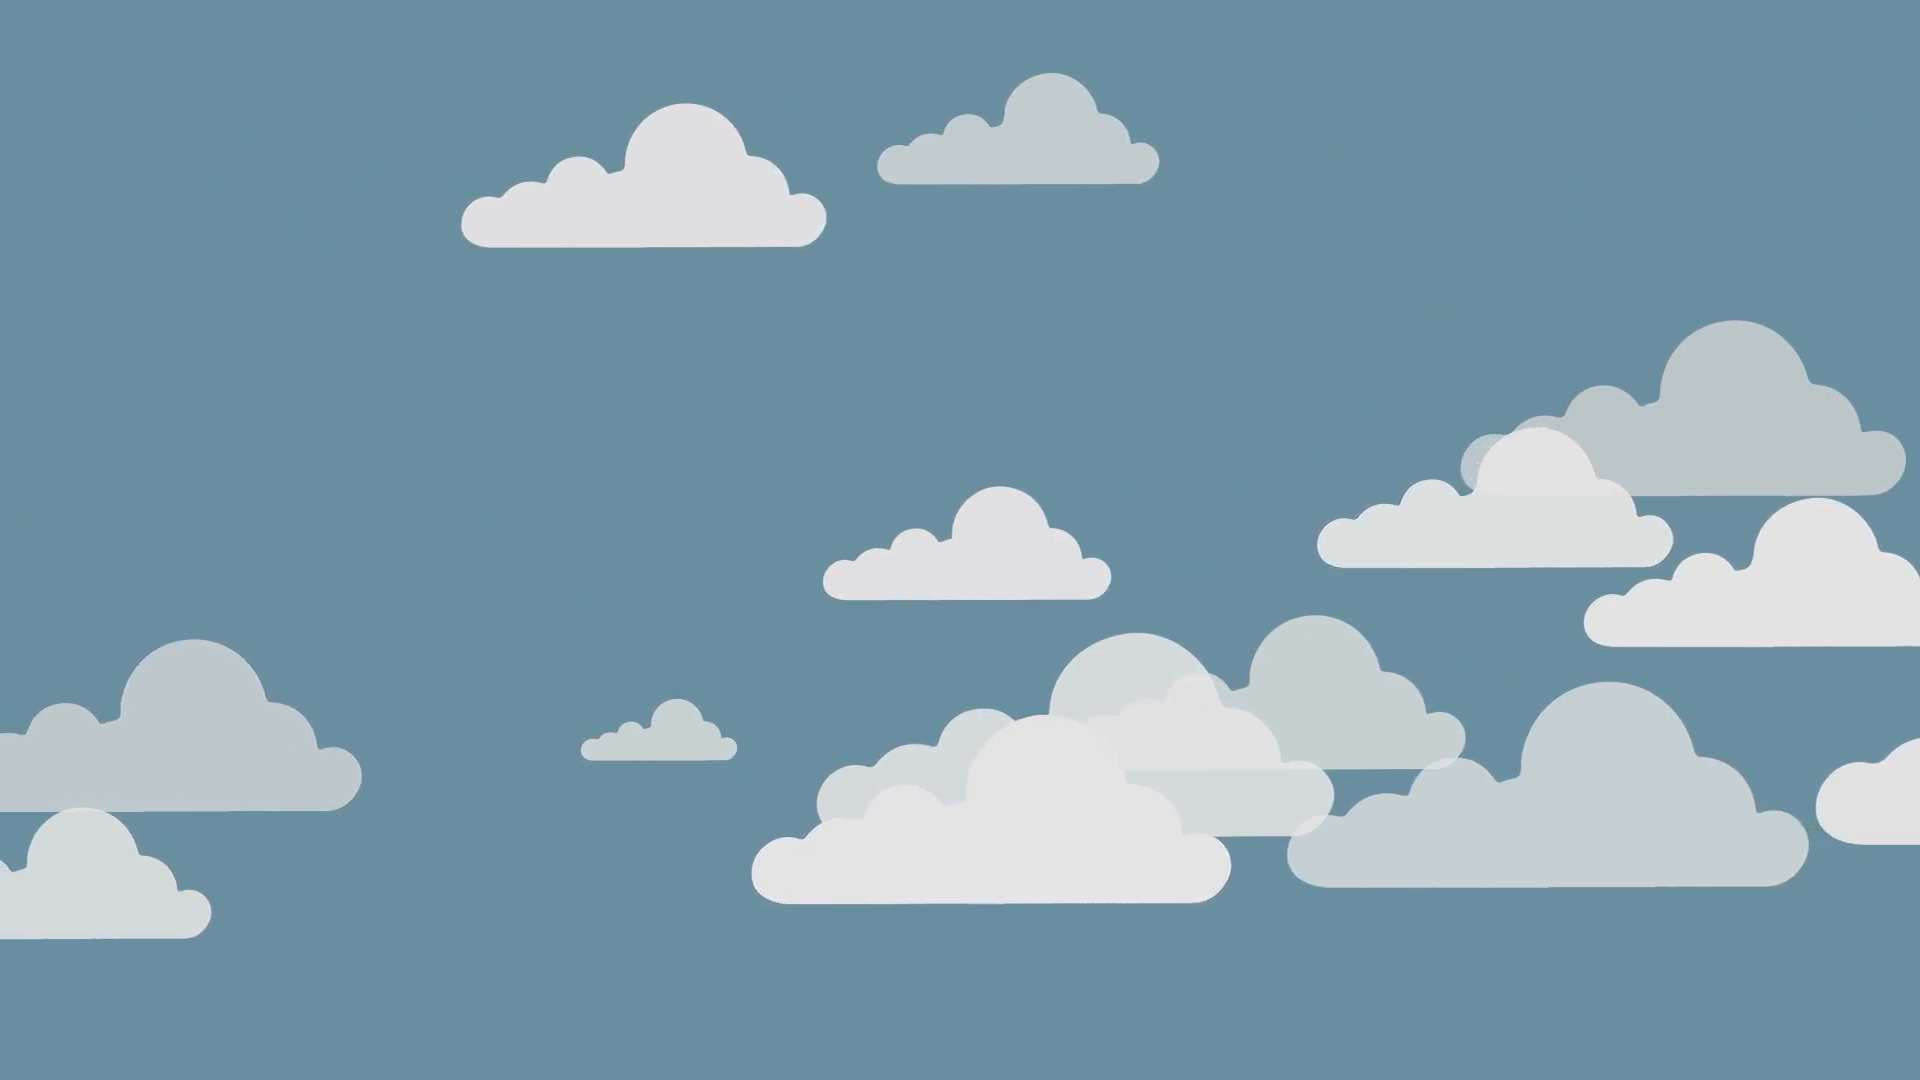 Free Cartoon Clouds Png, Download Free Cartoon Clouds Png png images